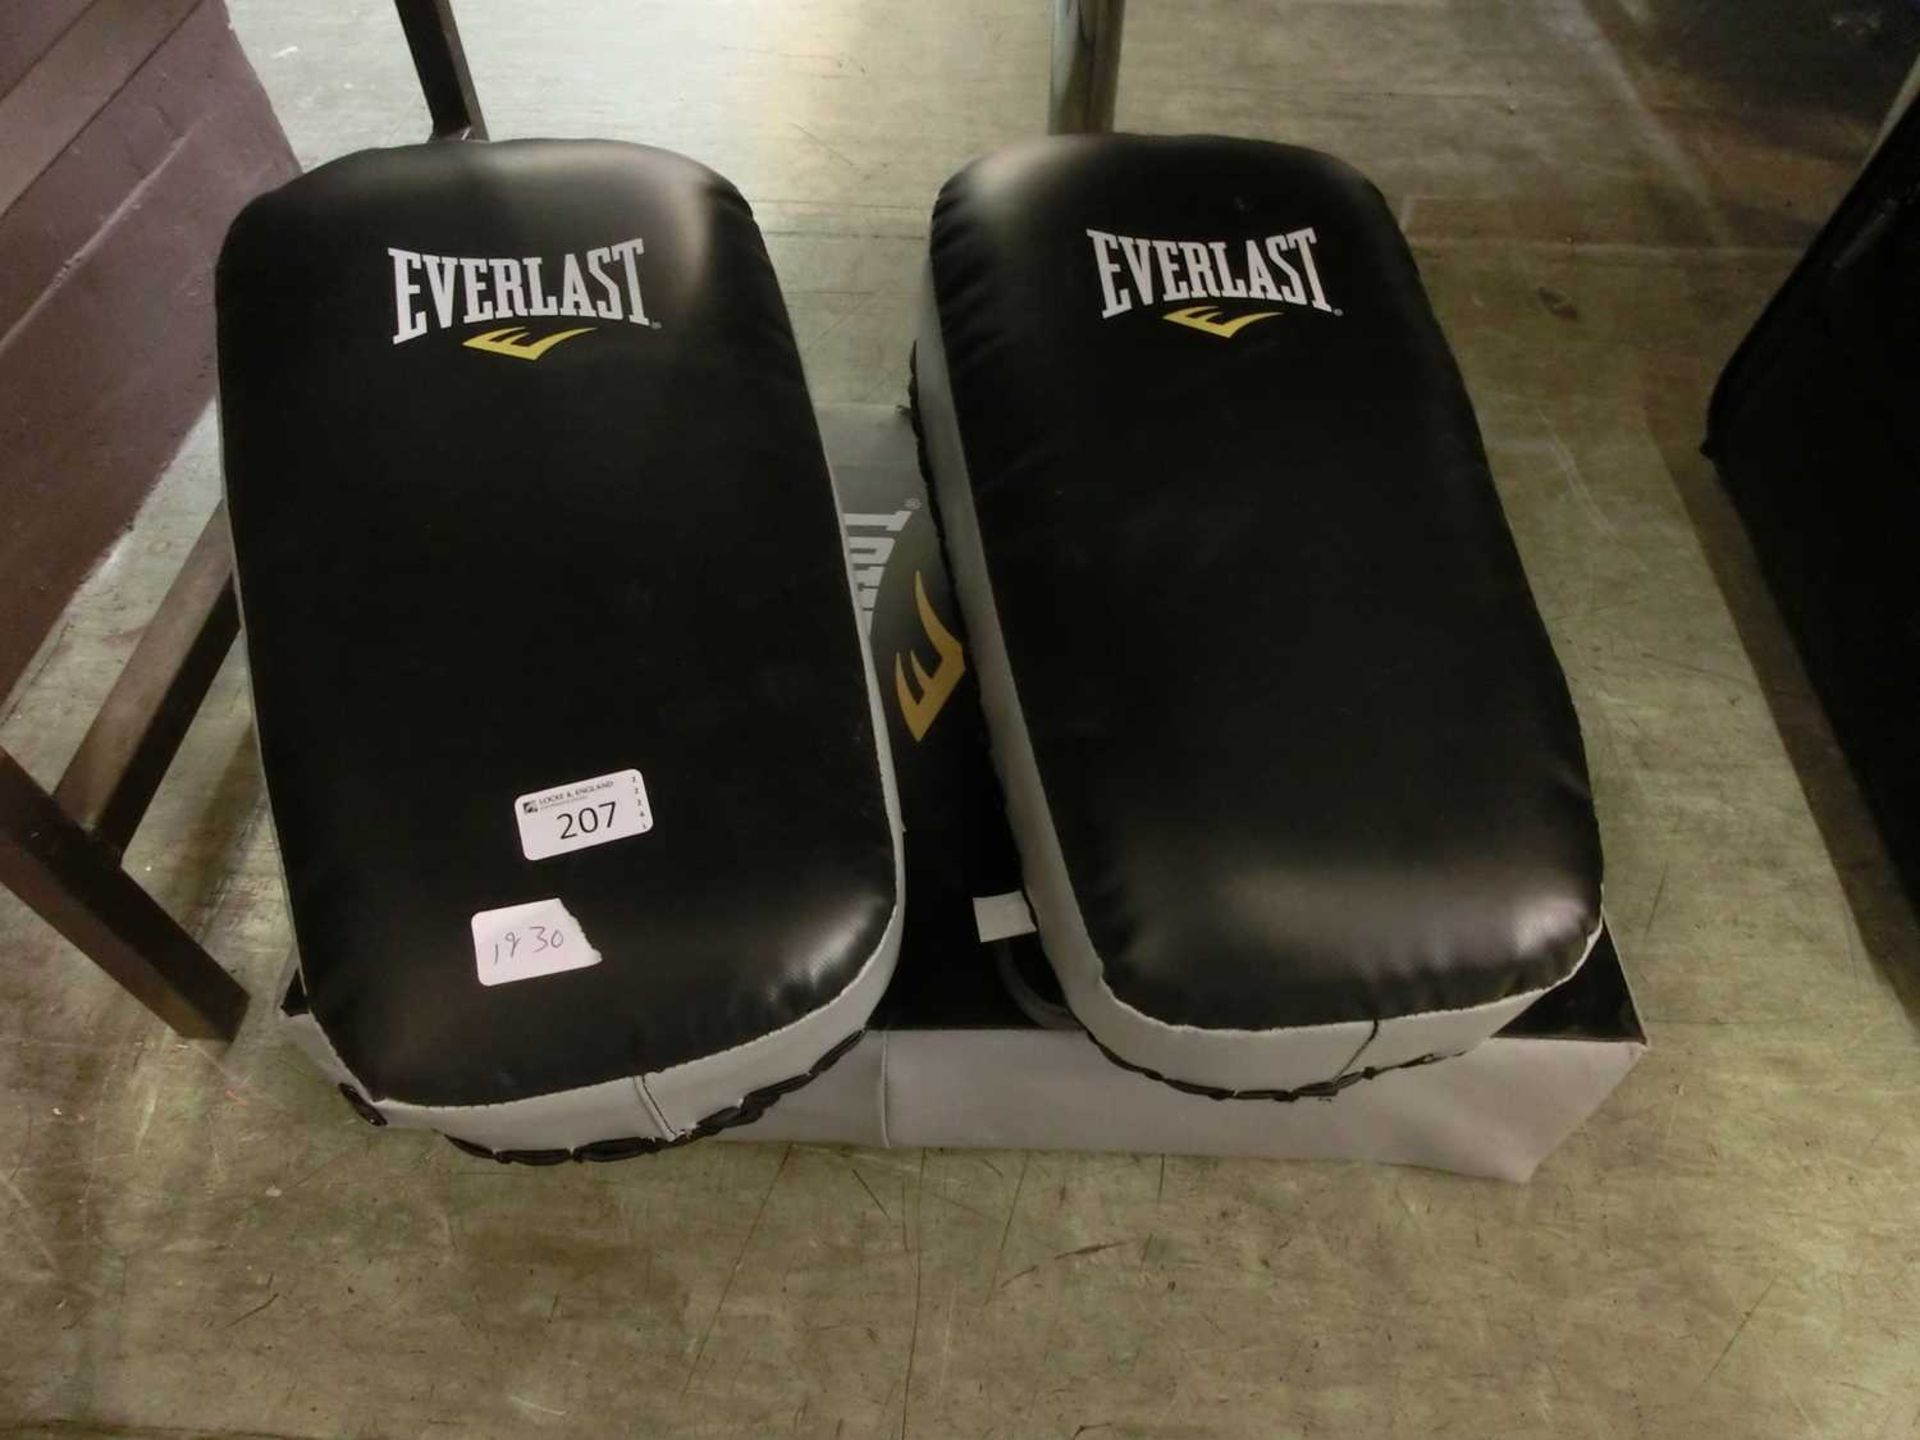 A set of two Everlast boxing training pads along with a kick shield